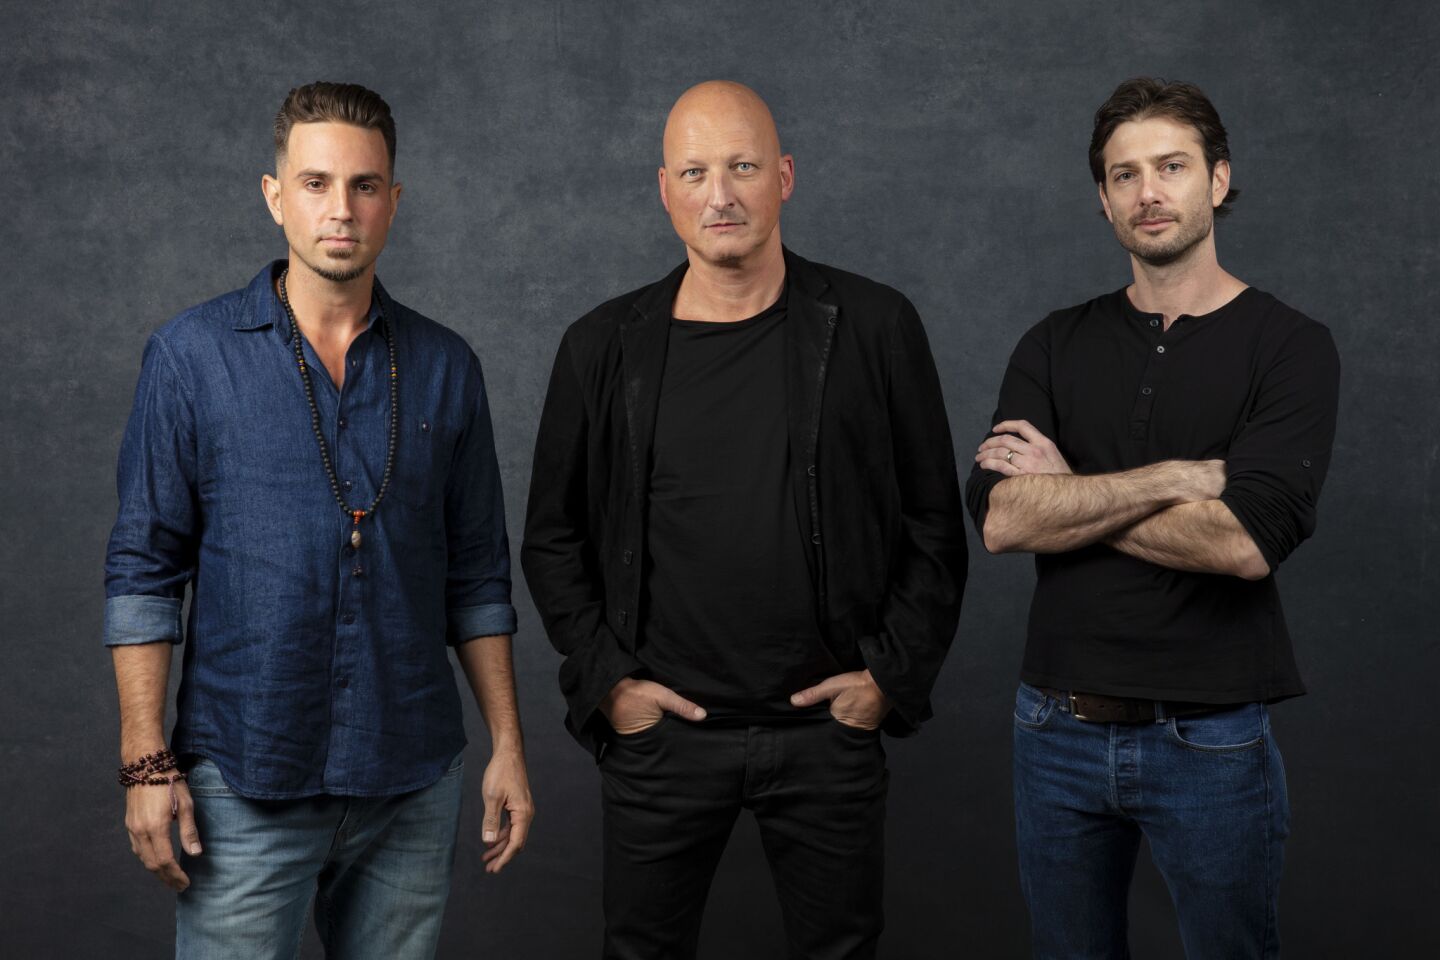 Subject Wade Robson, director Dan Reed and subject James Safechuck, from the documentary "Leaving Neverland."